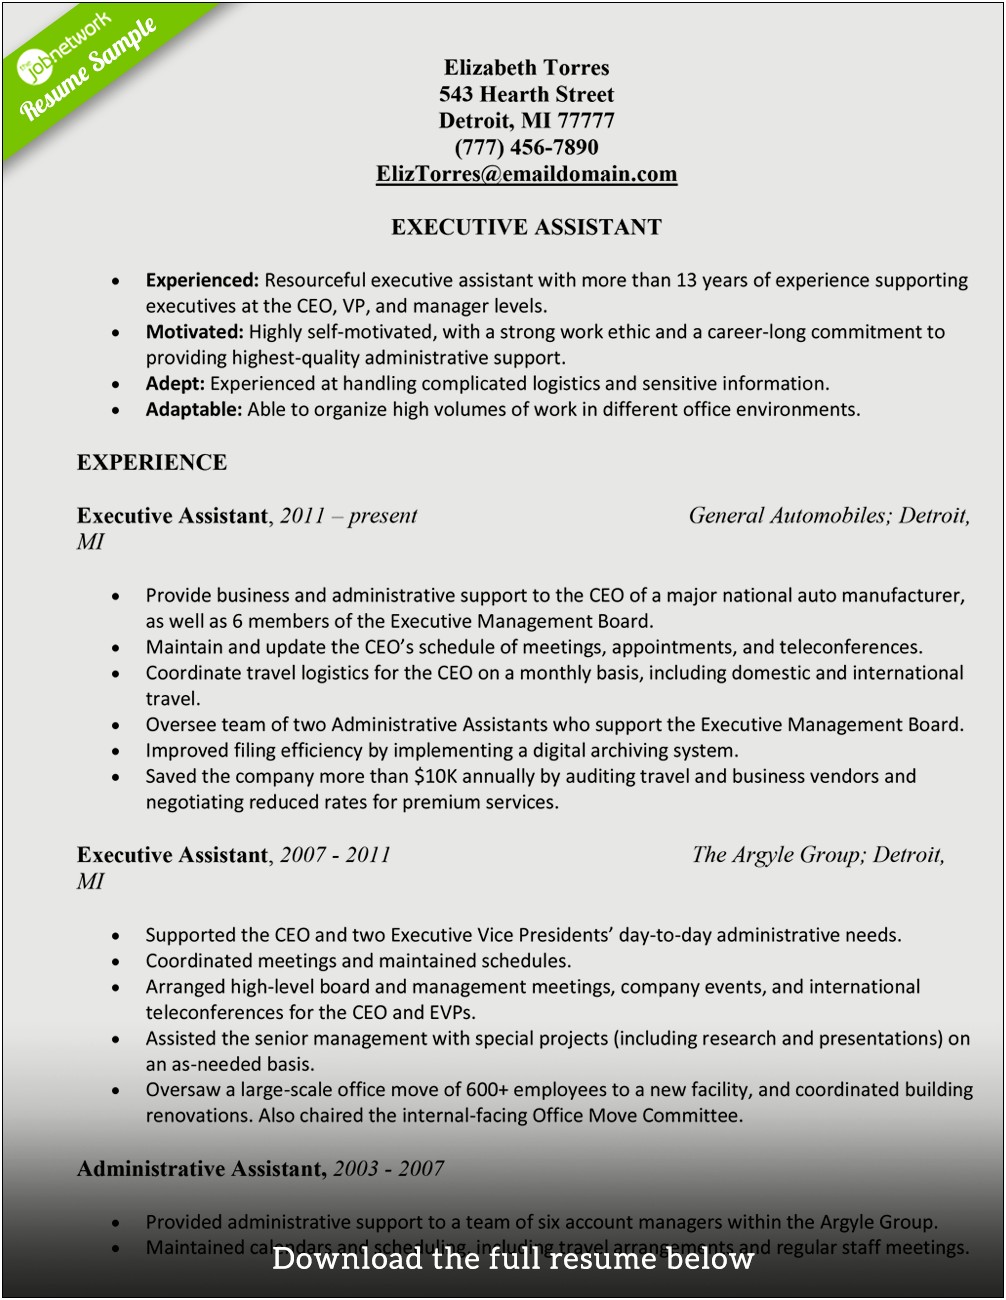 Administrative Assistant Objective Statement Resume Examples